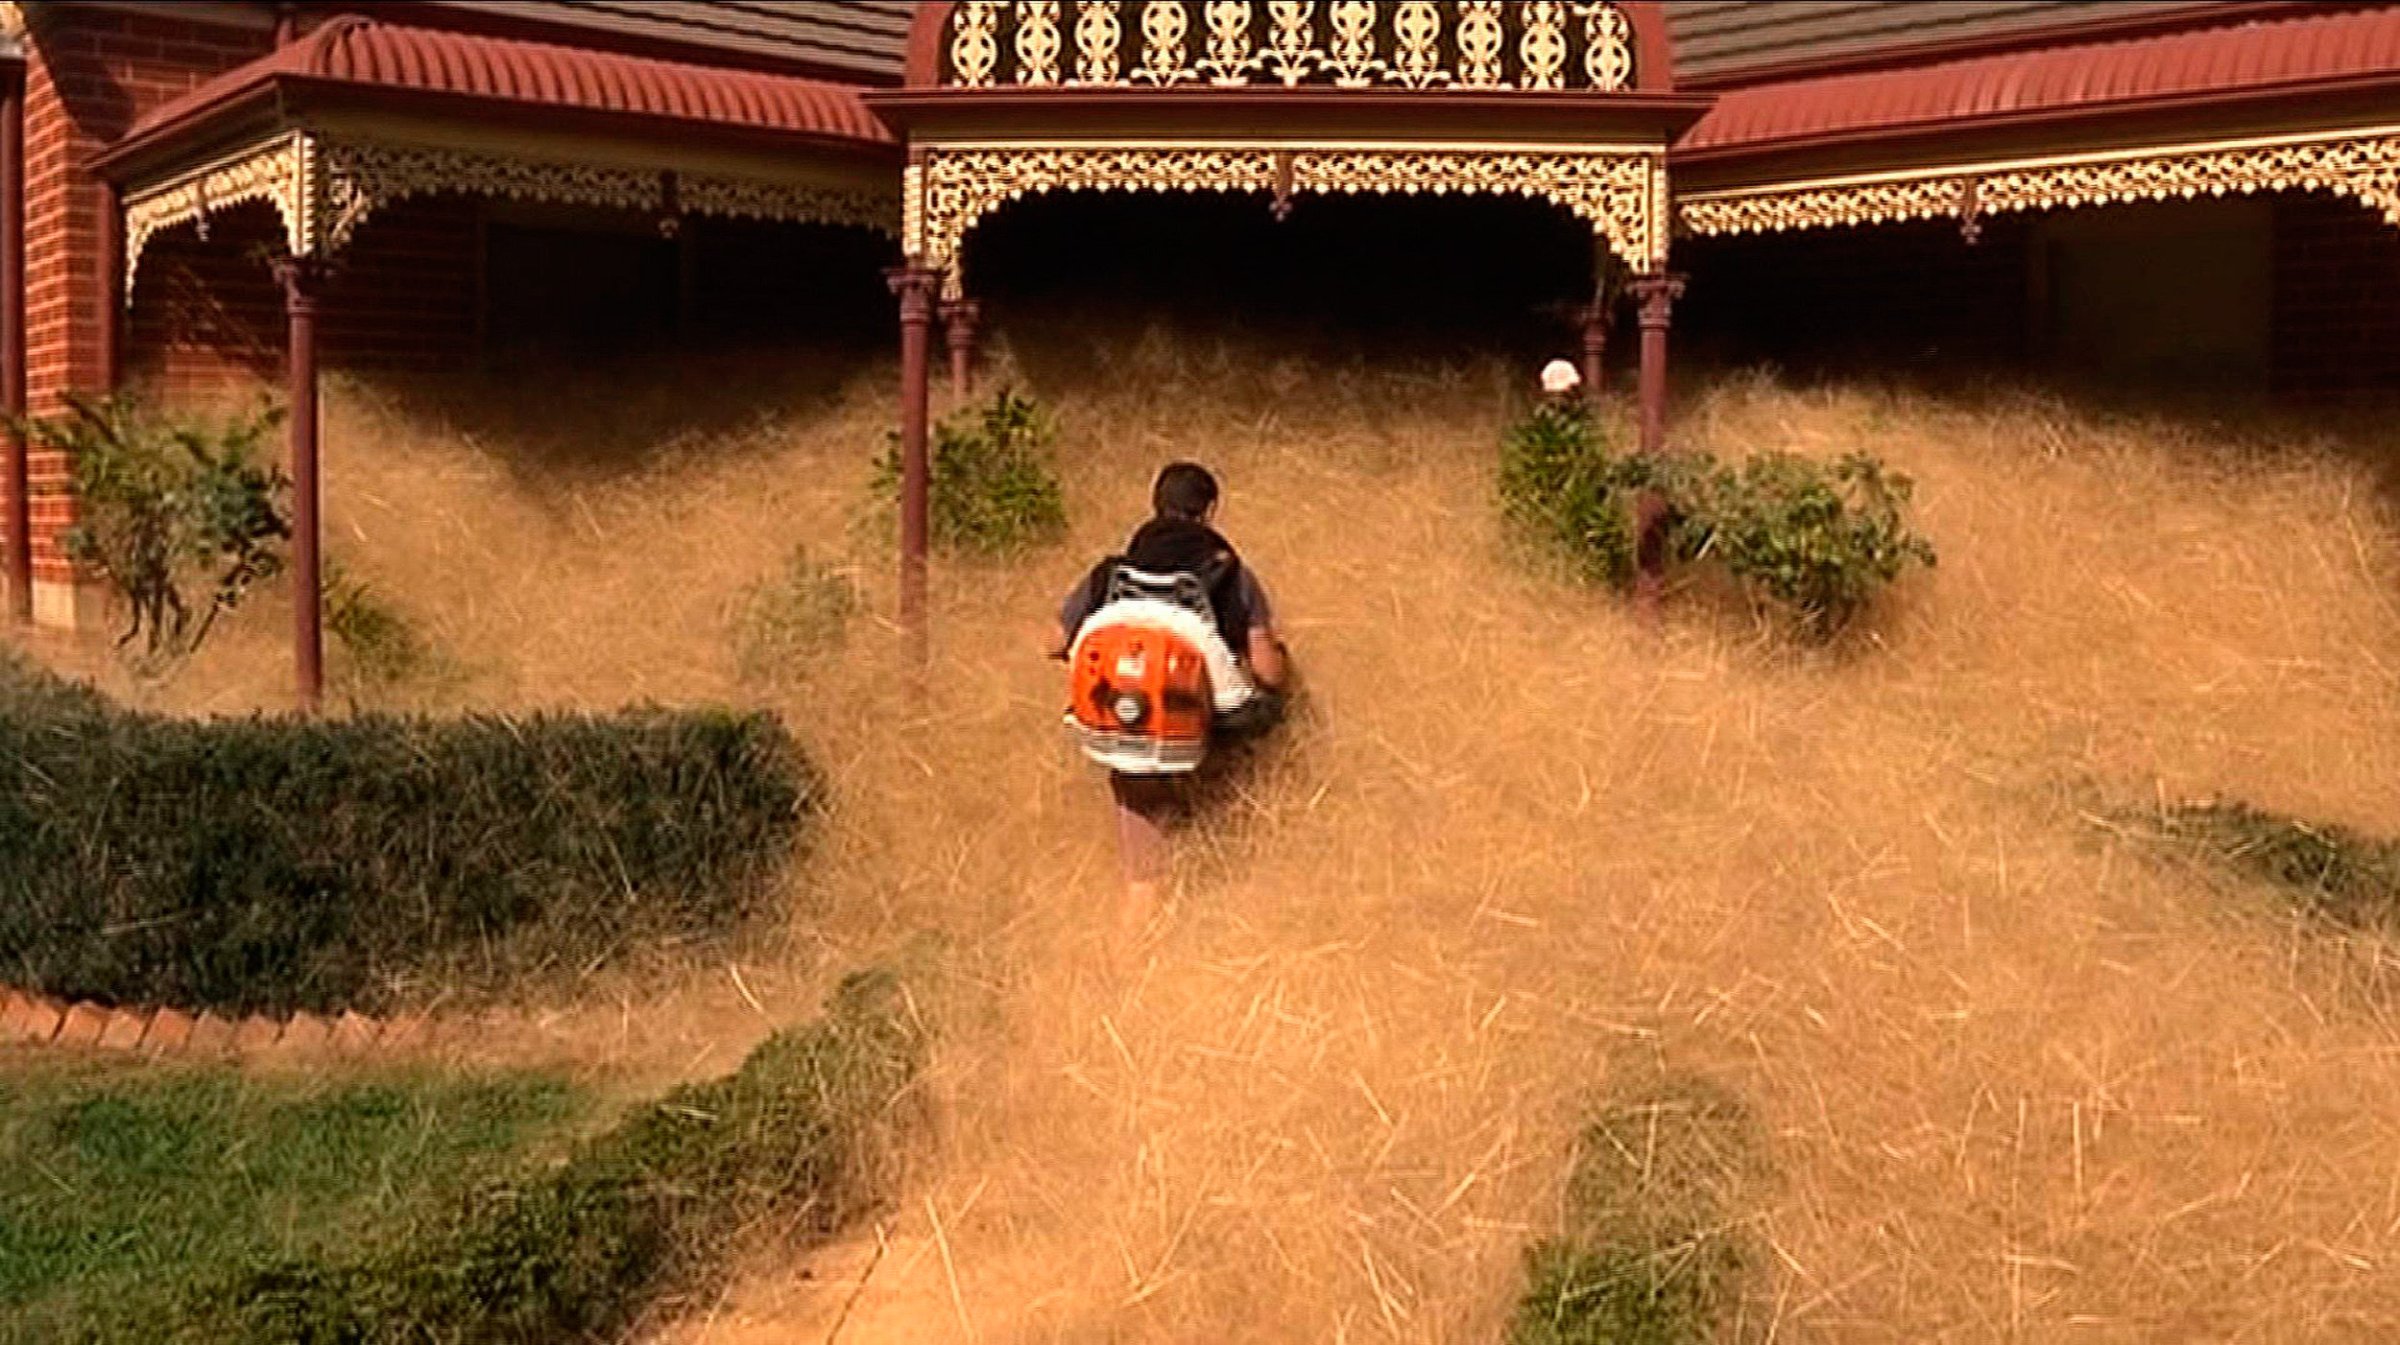 This frame grab from footage released by Australian television's Channel 7 on Feb. 18, 2016, shows a man clearing out fast-growing tumbleweed from a home in the town of Wangaratta, 150 miles northeast of Melbourne, Australia.